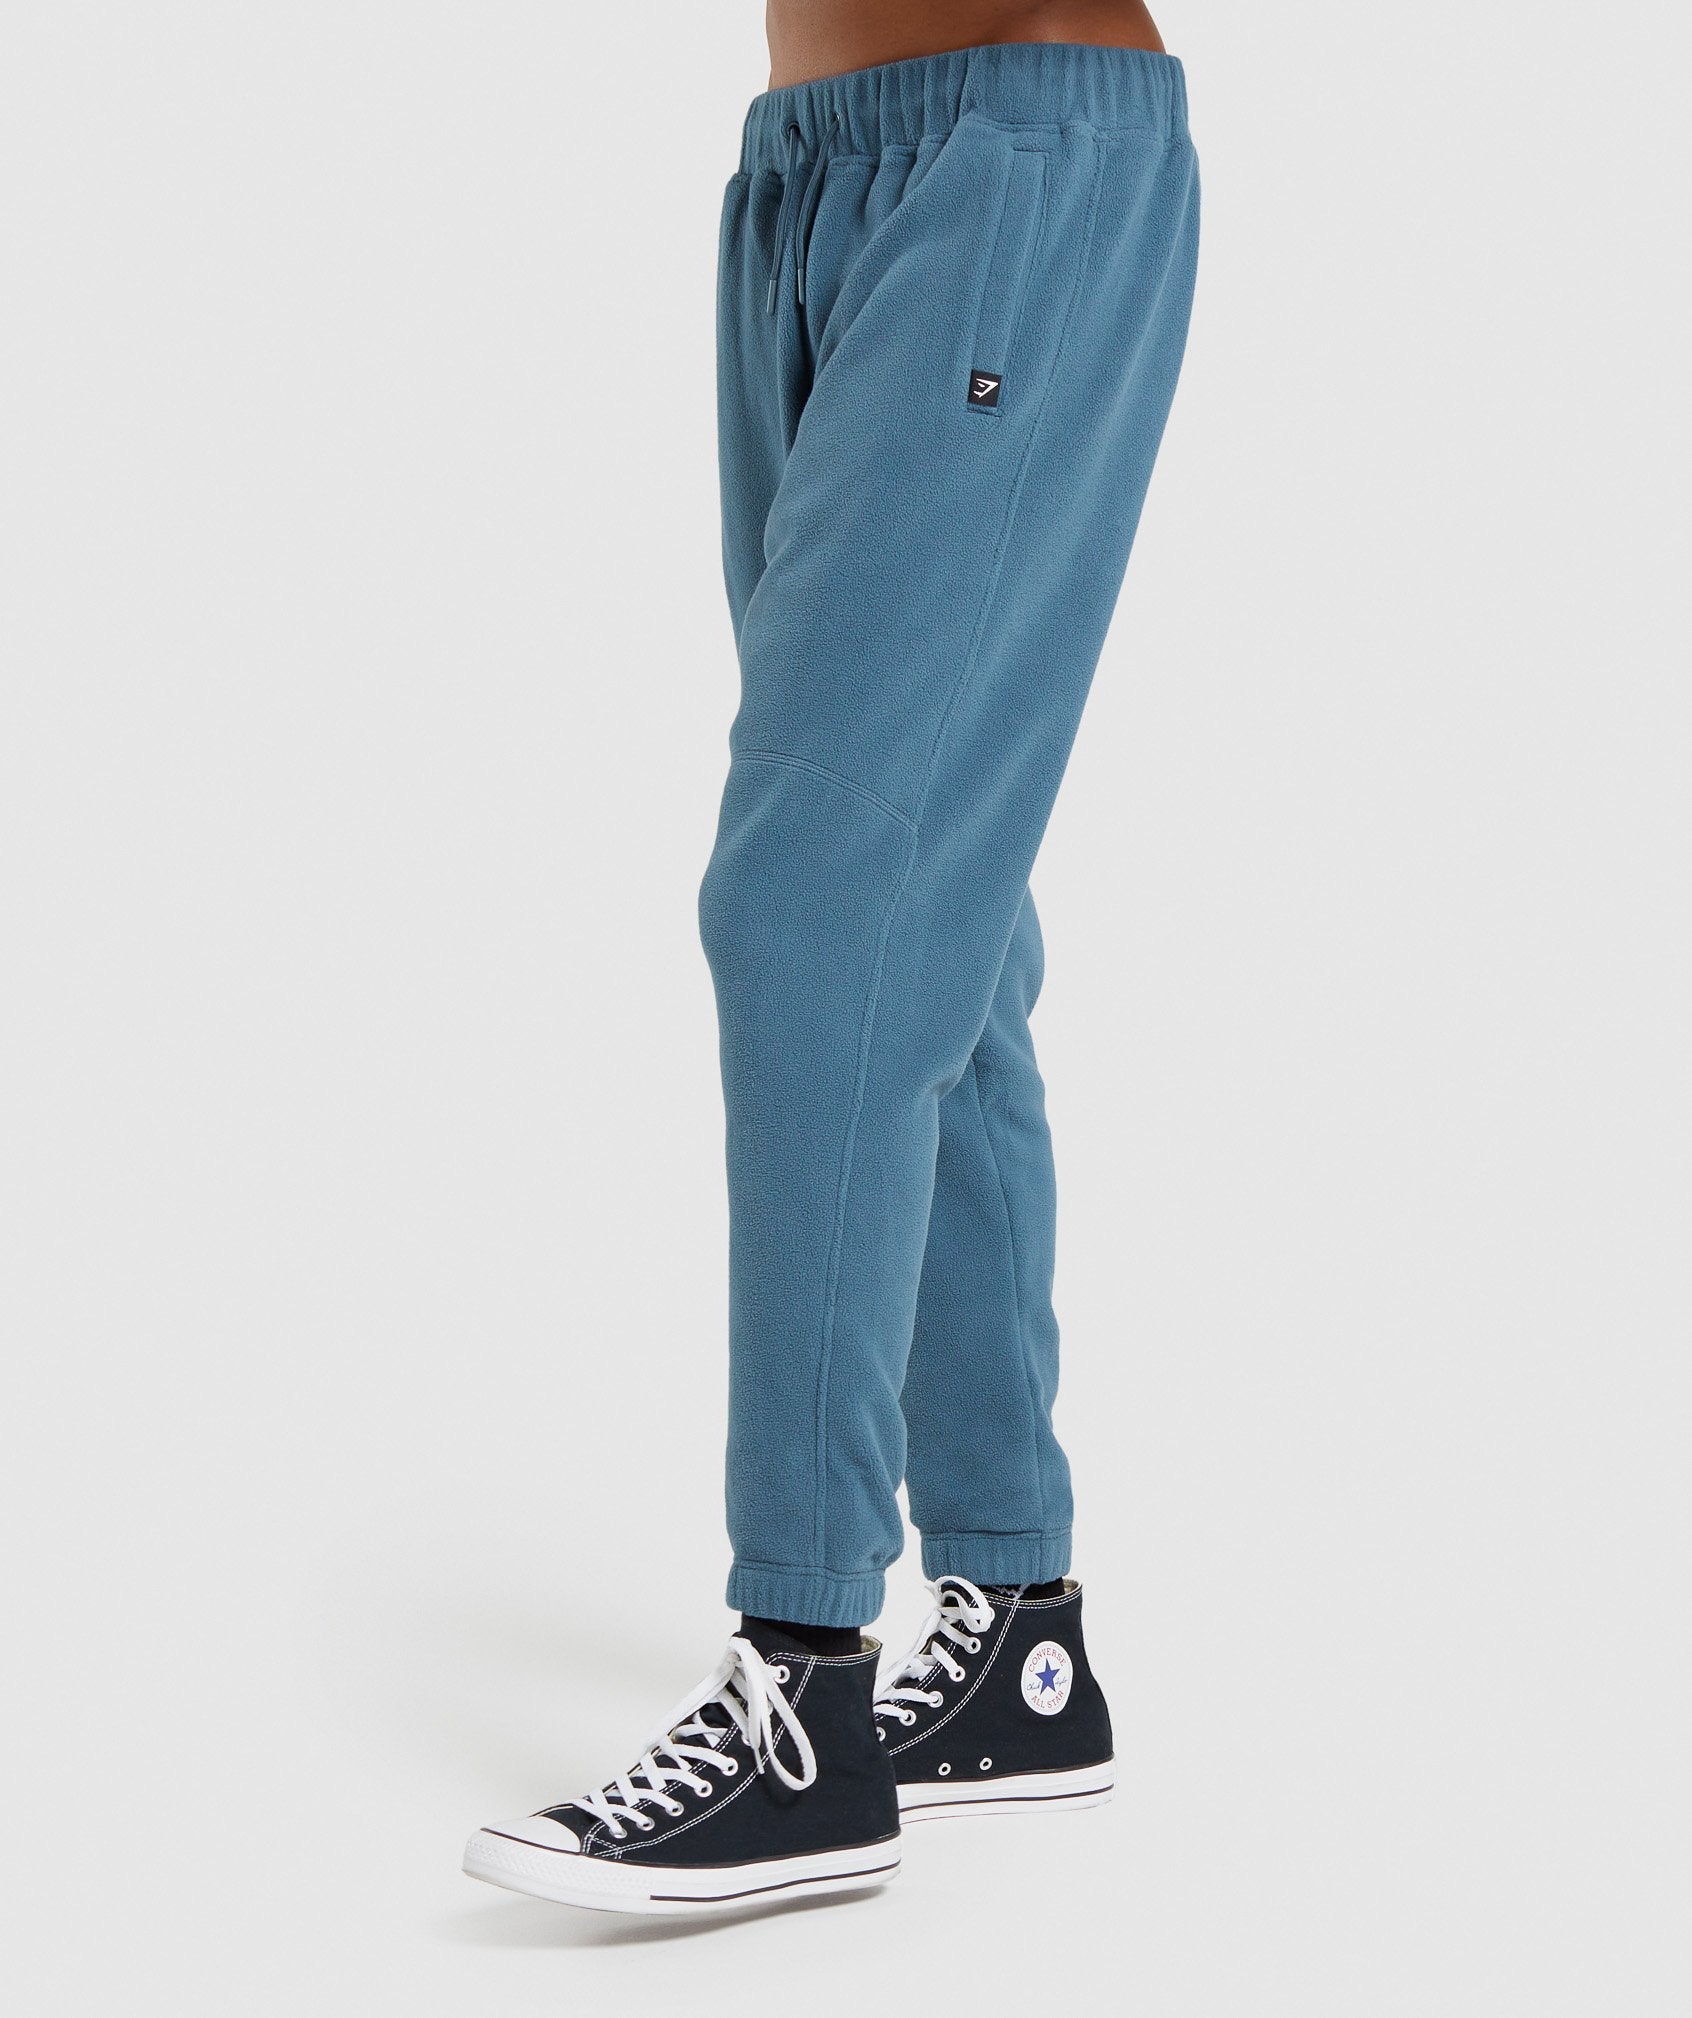 Grade Joggers in Teal